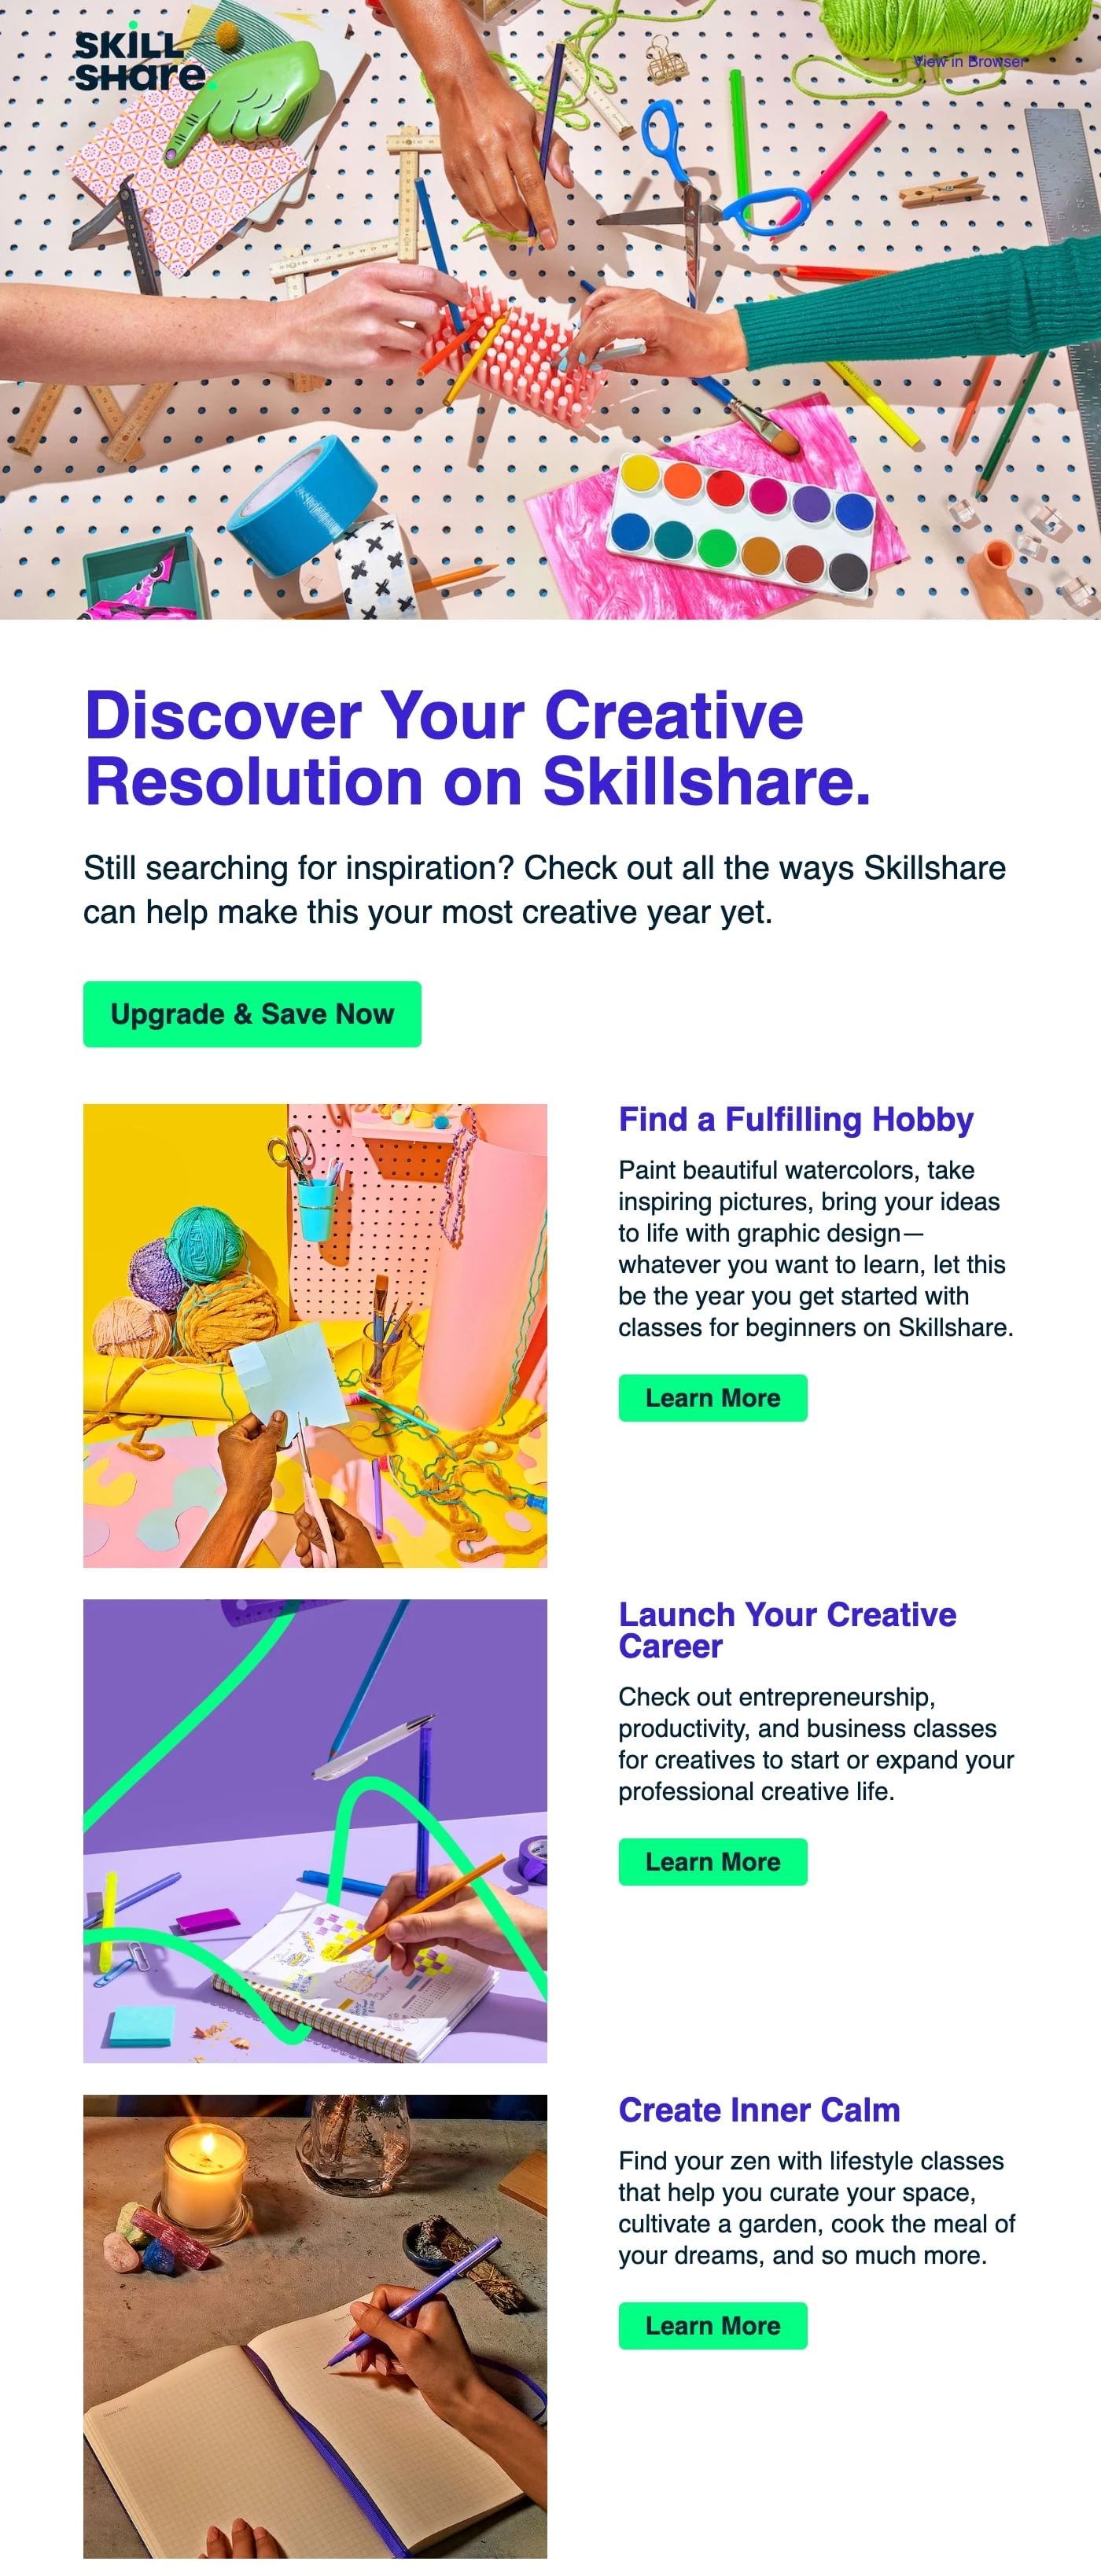 post-christmas gift email example from Skillshare setting new year's resolutions.